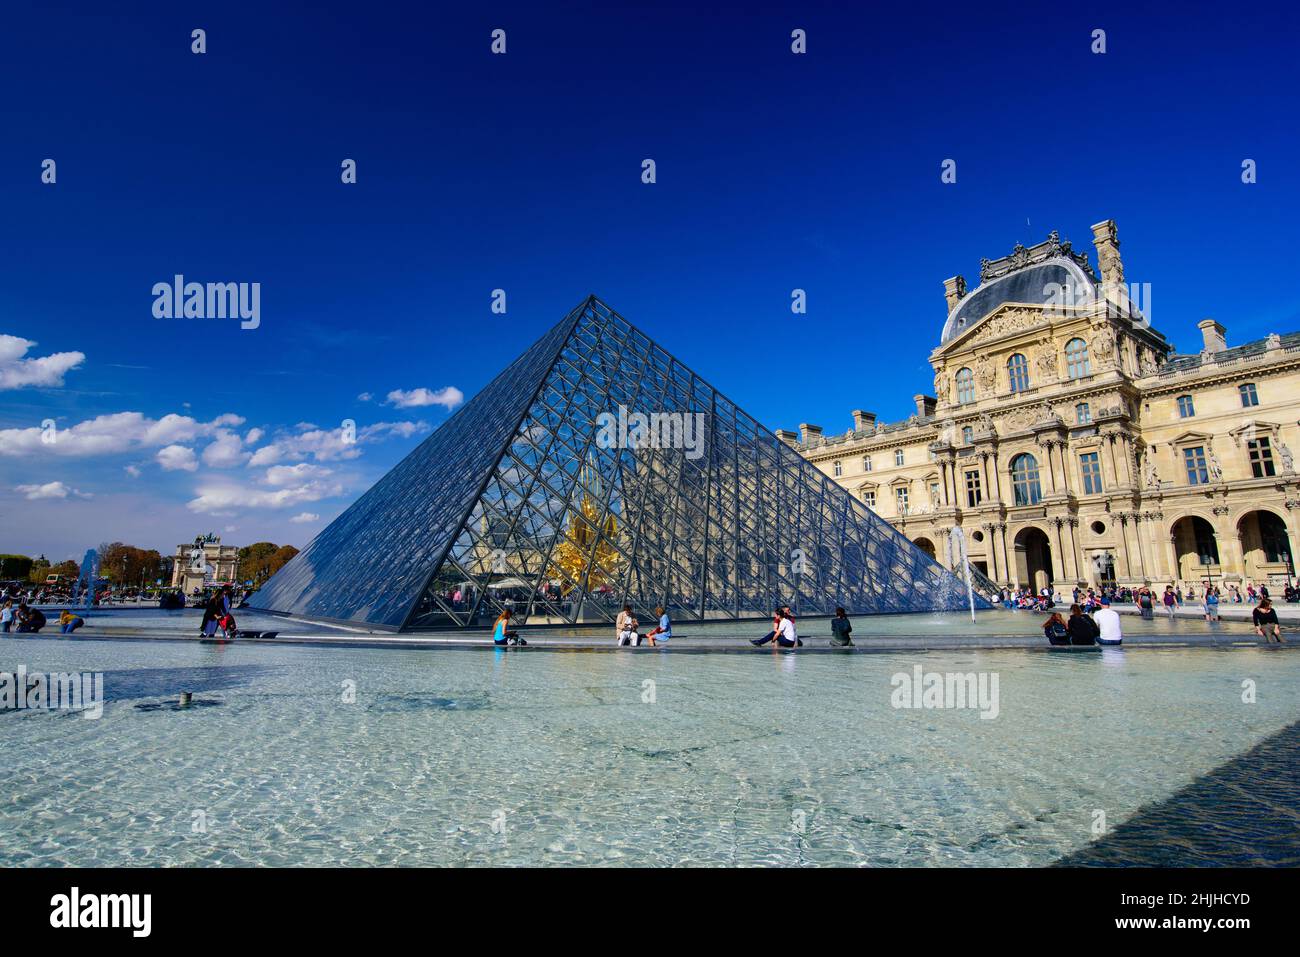 Louvre Museum (Musée du Louvre) with Pyramid in Paris, France, Europe Stock Photo